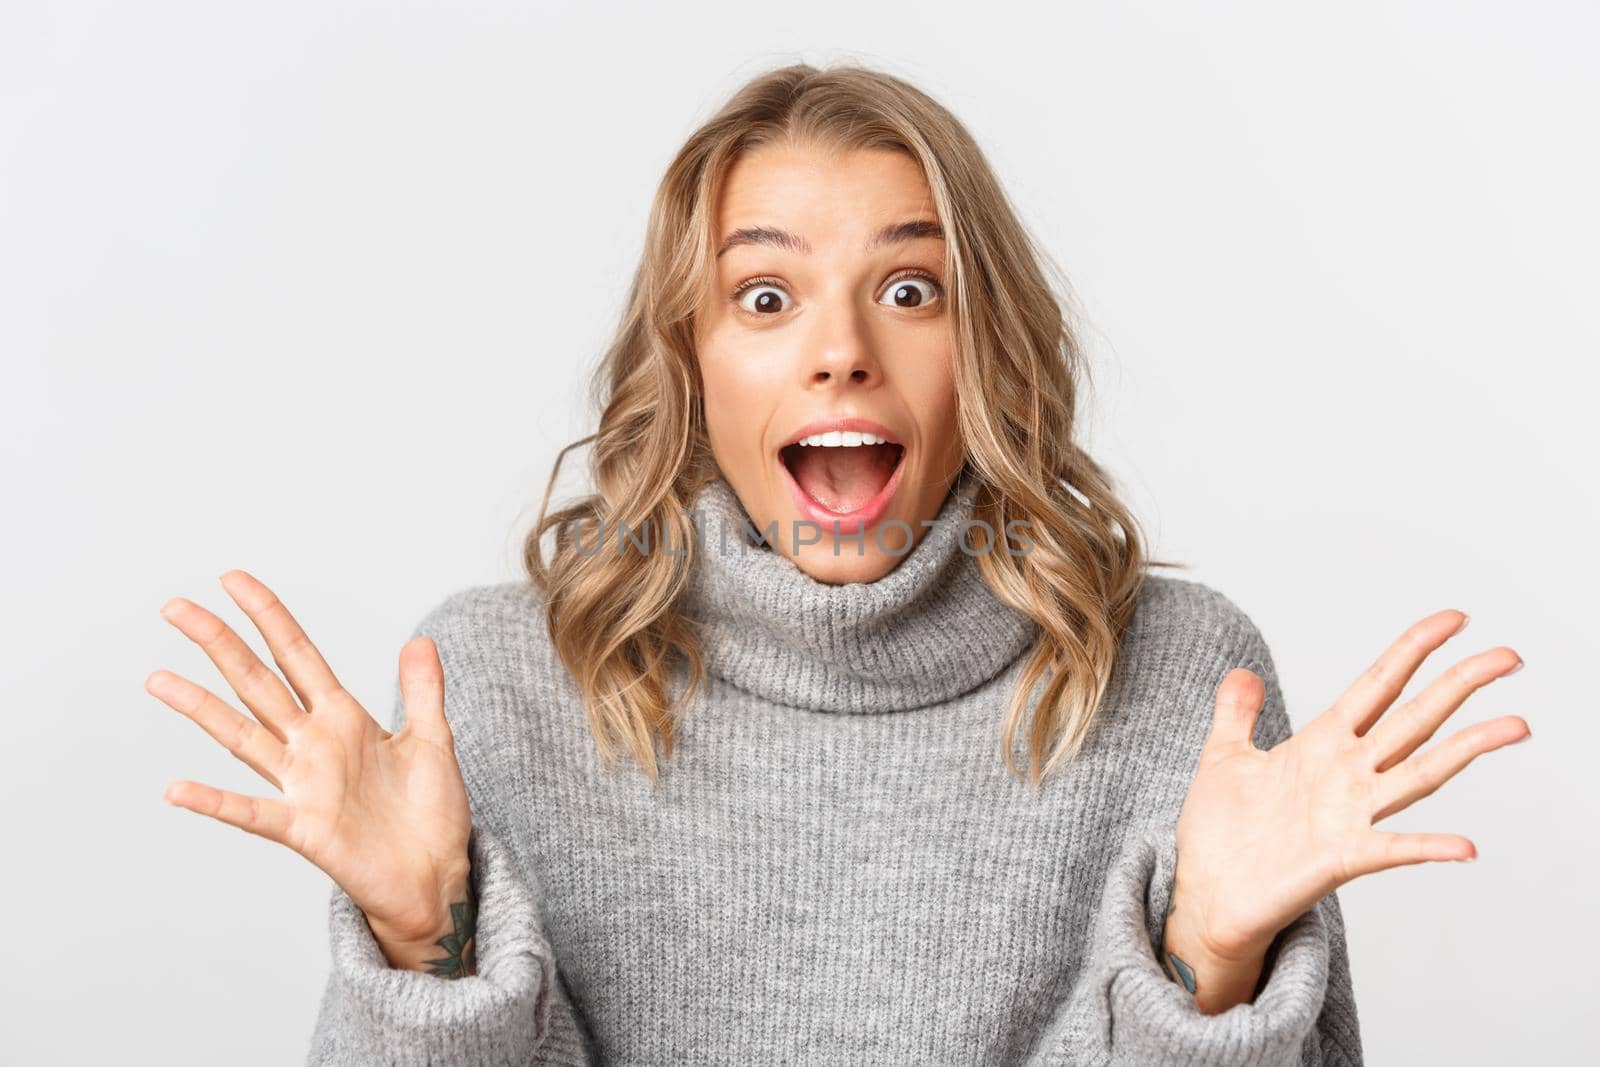 Close-up of beautiful blond girl in grey sweater, screaming for joy, looking surprised, standing over white background.